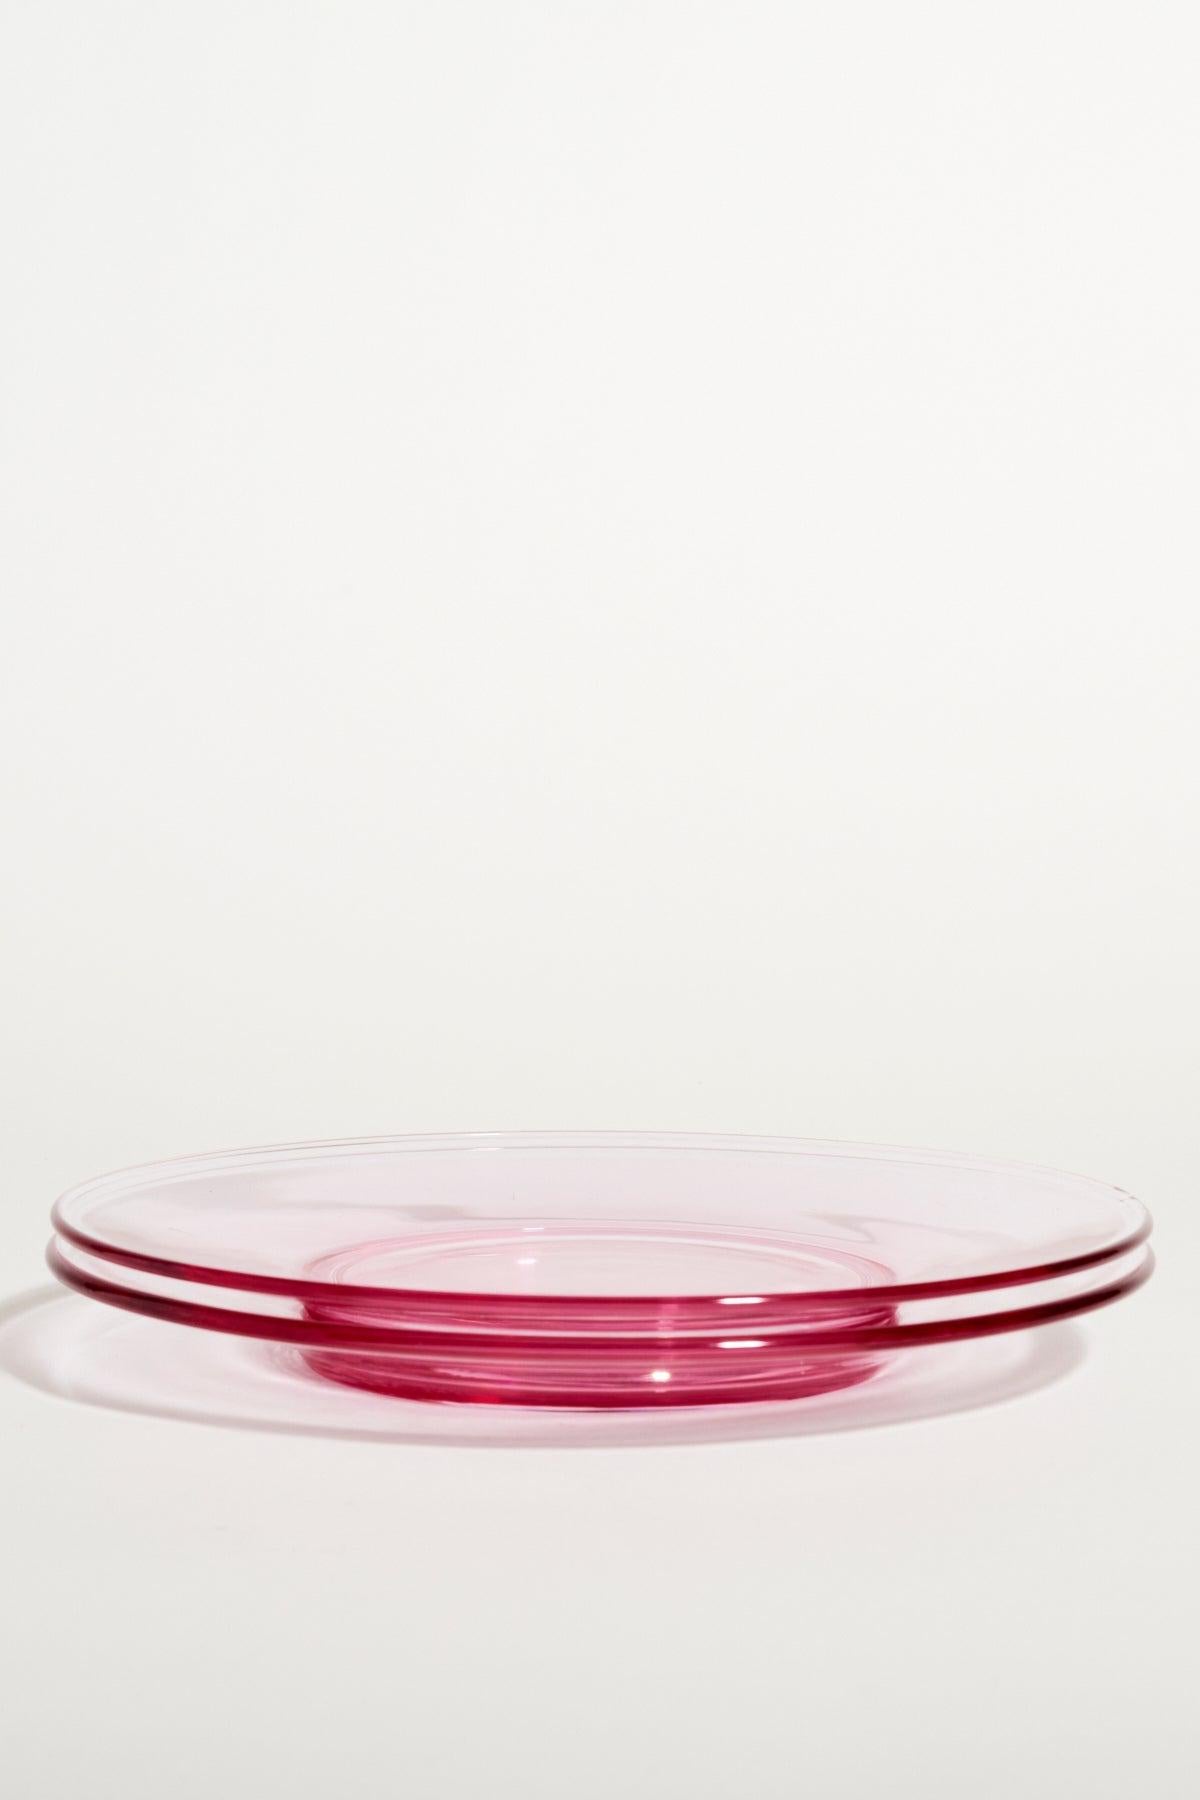 Mid-Century Modern Cerise Pink Mid-Century Glass Plates Set of Two For Sale